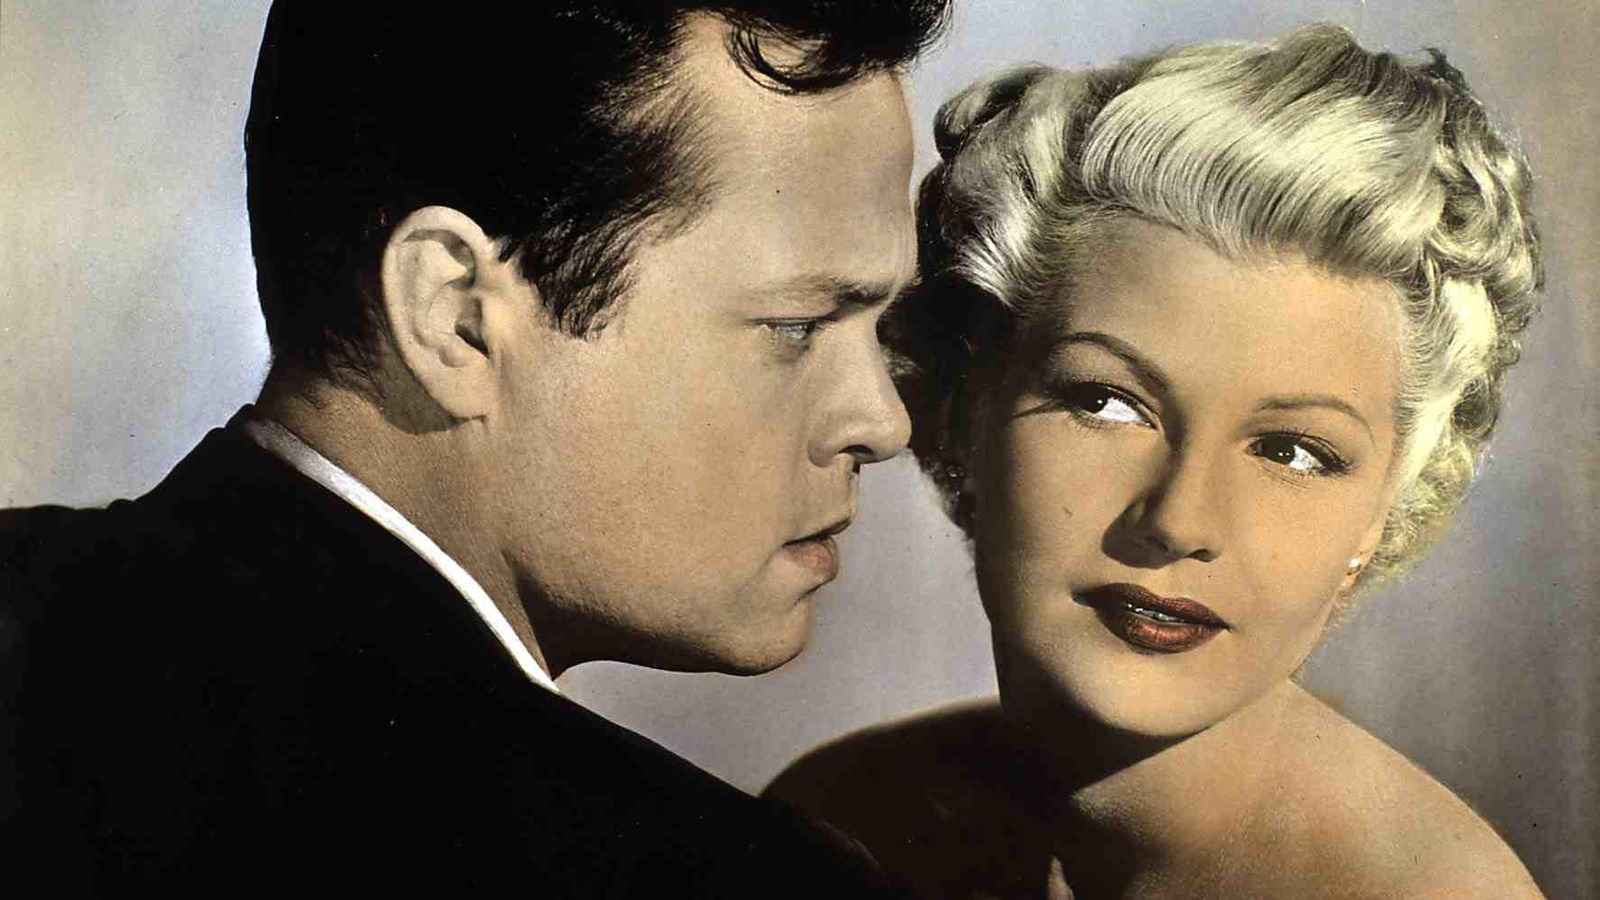 Rita Hayworth's Lincoln Continental Gifted by Orson Welles Goes up